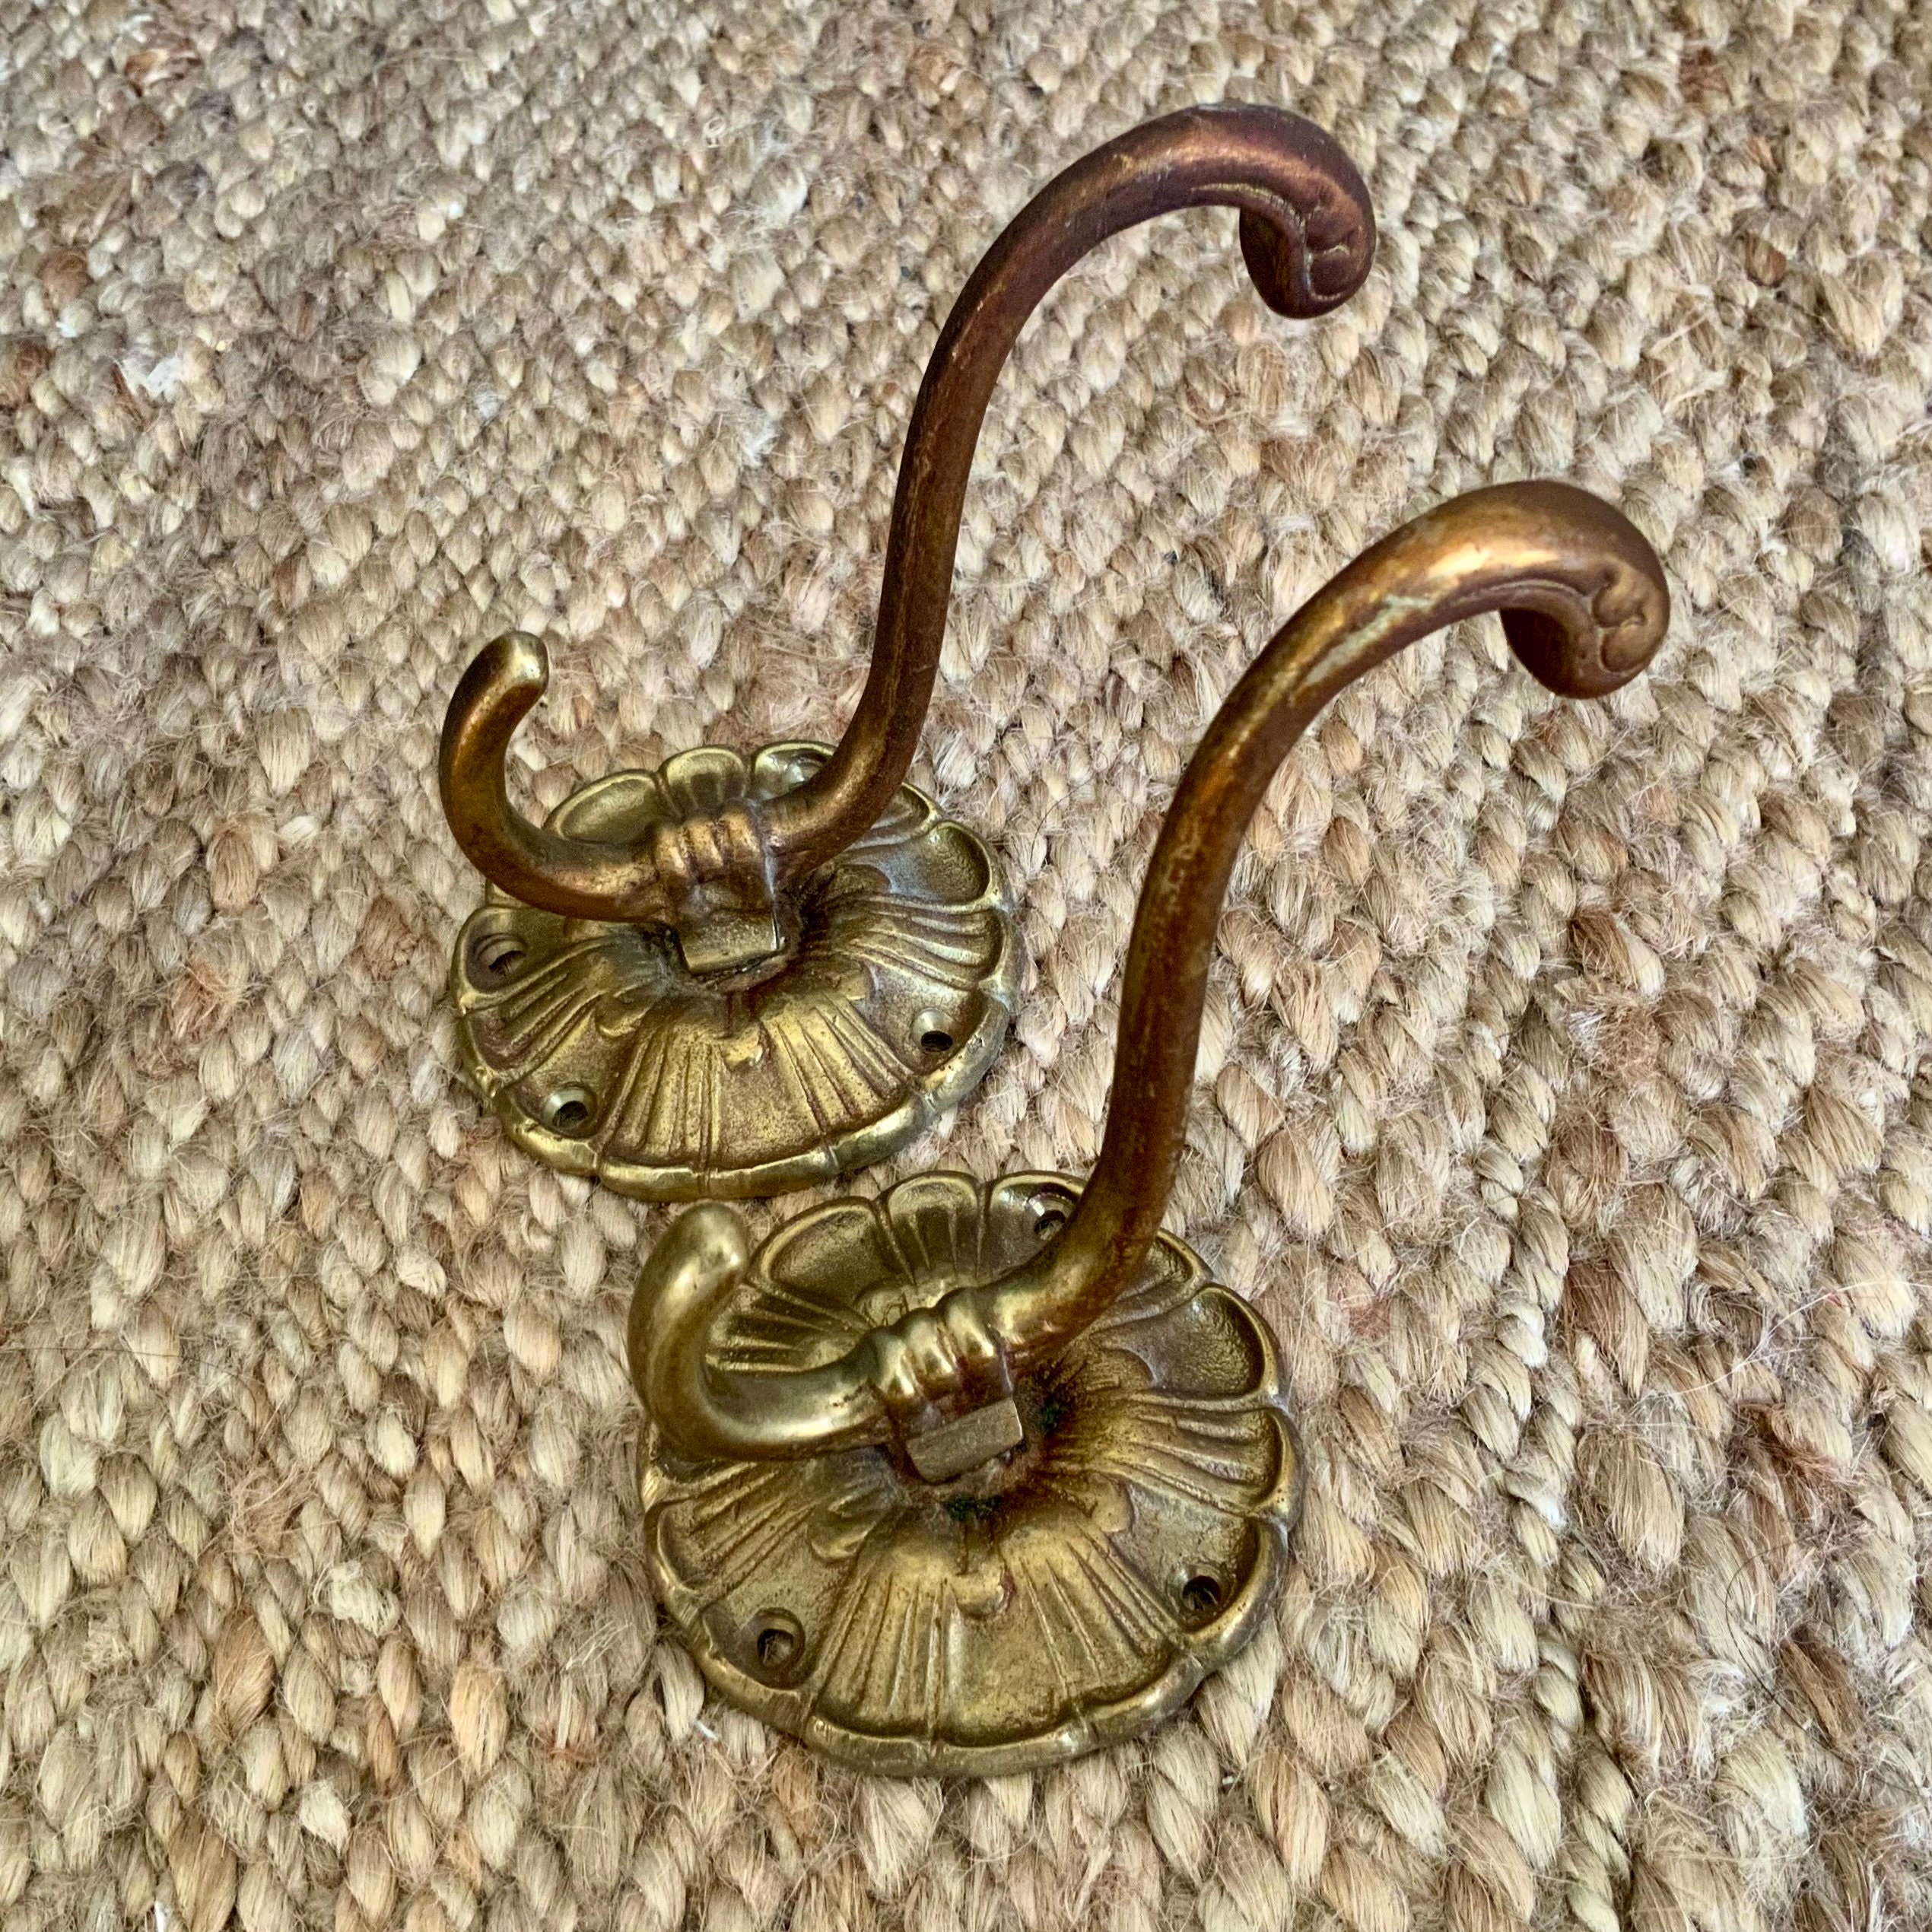 Bronze Squirrel Cane Topper sold at auction on 17th November